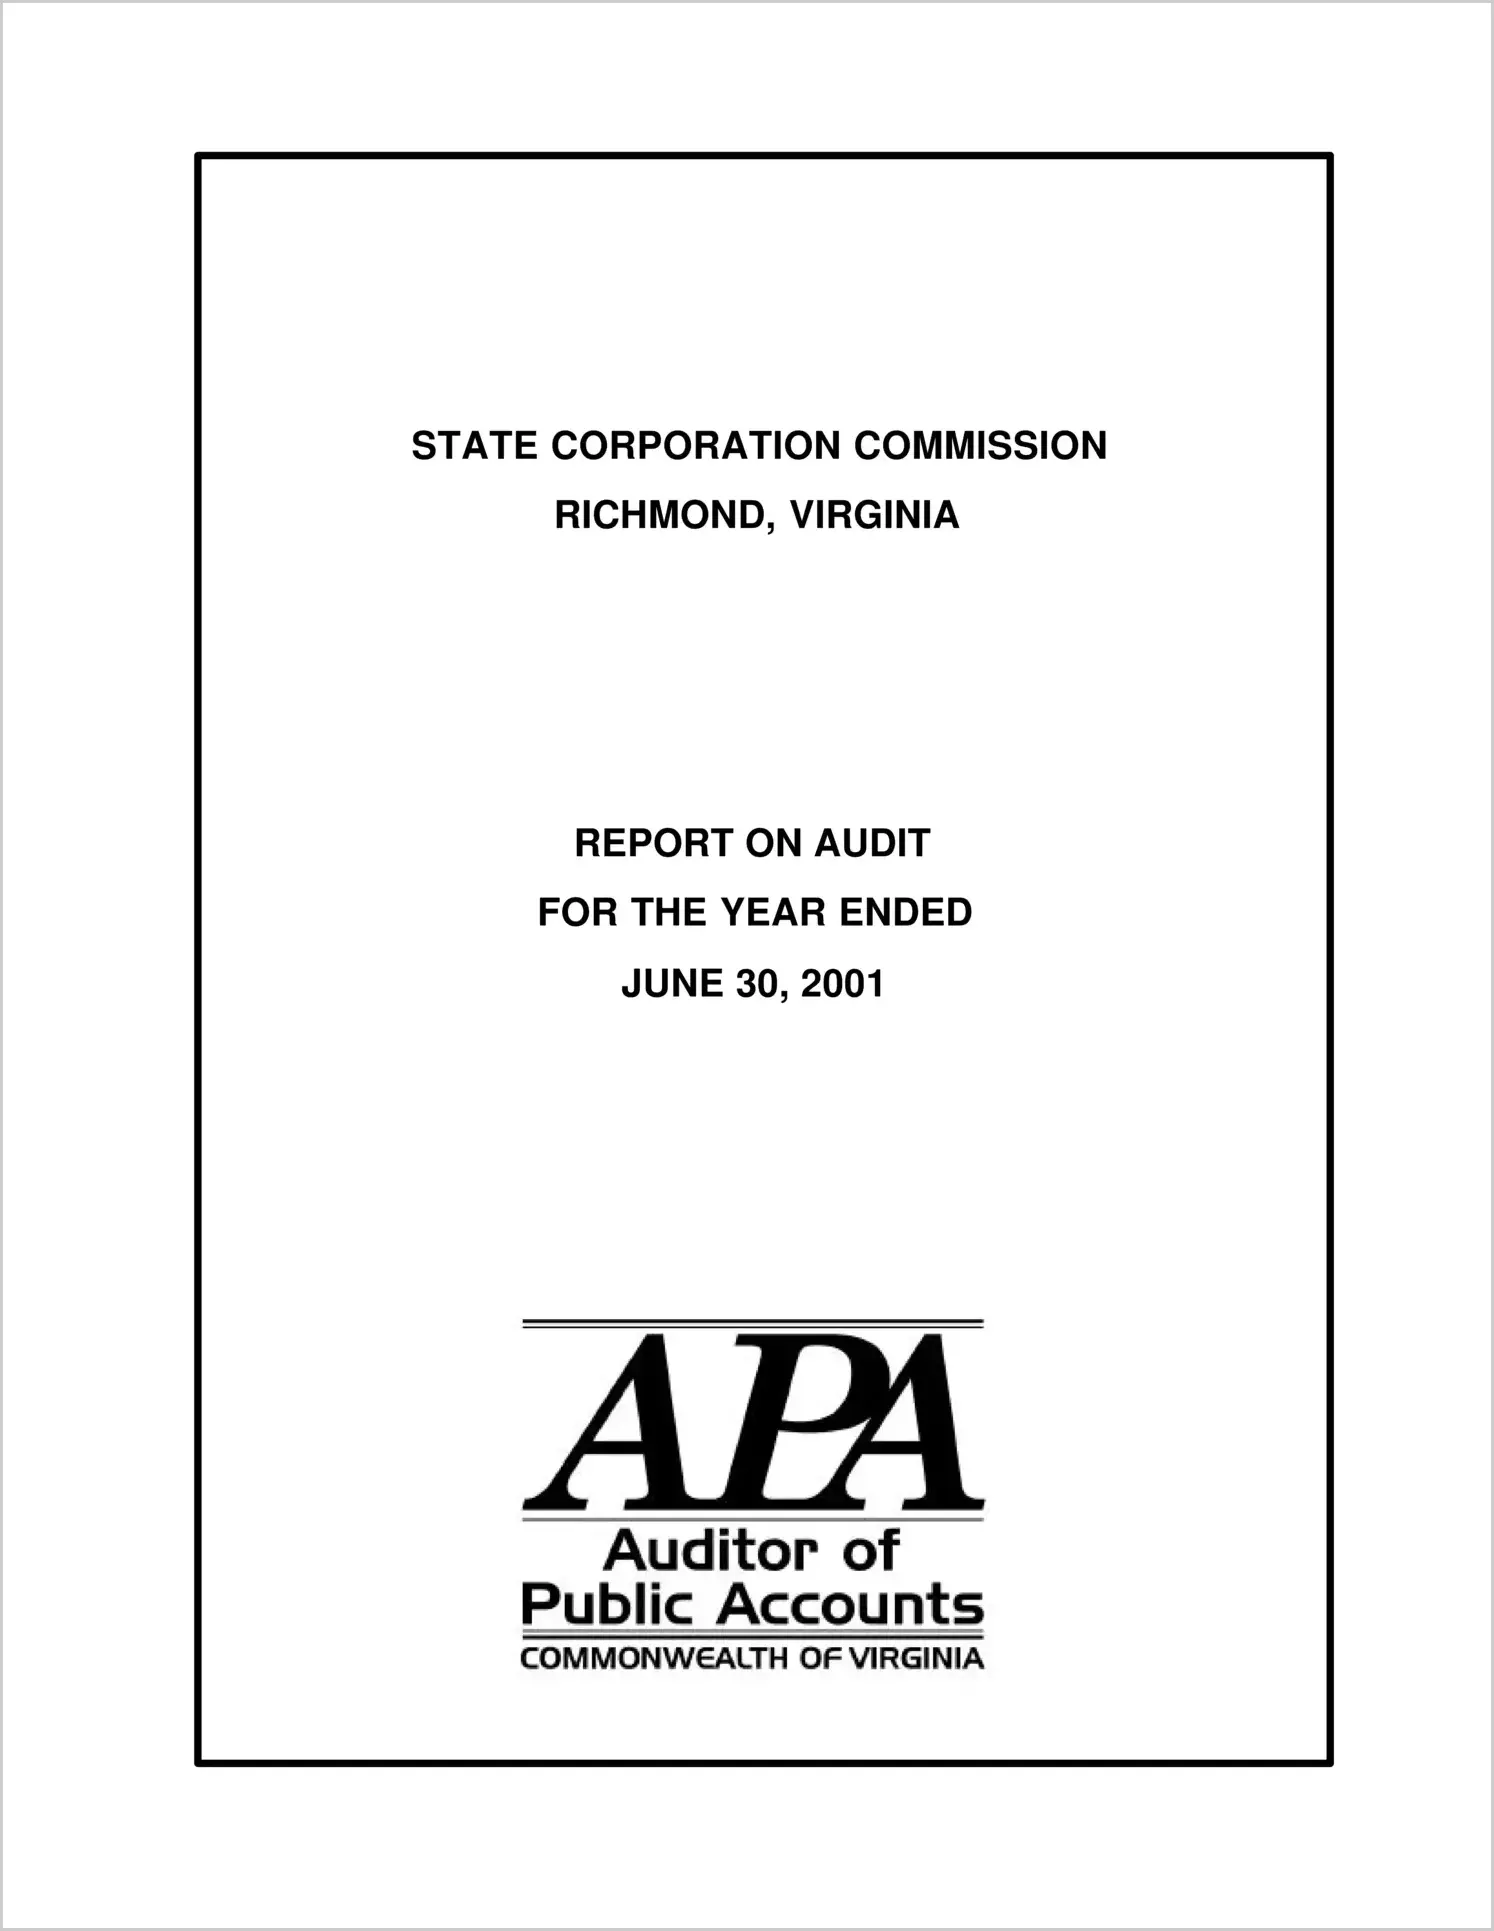 State Corporation Commission for the year ended June 30, 2001